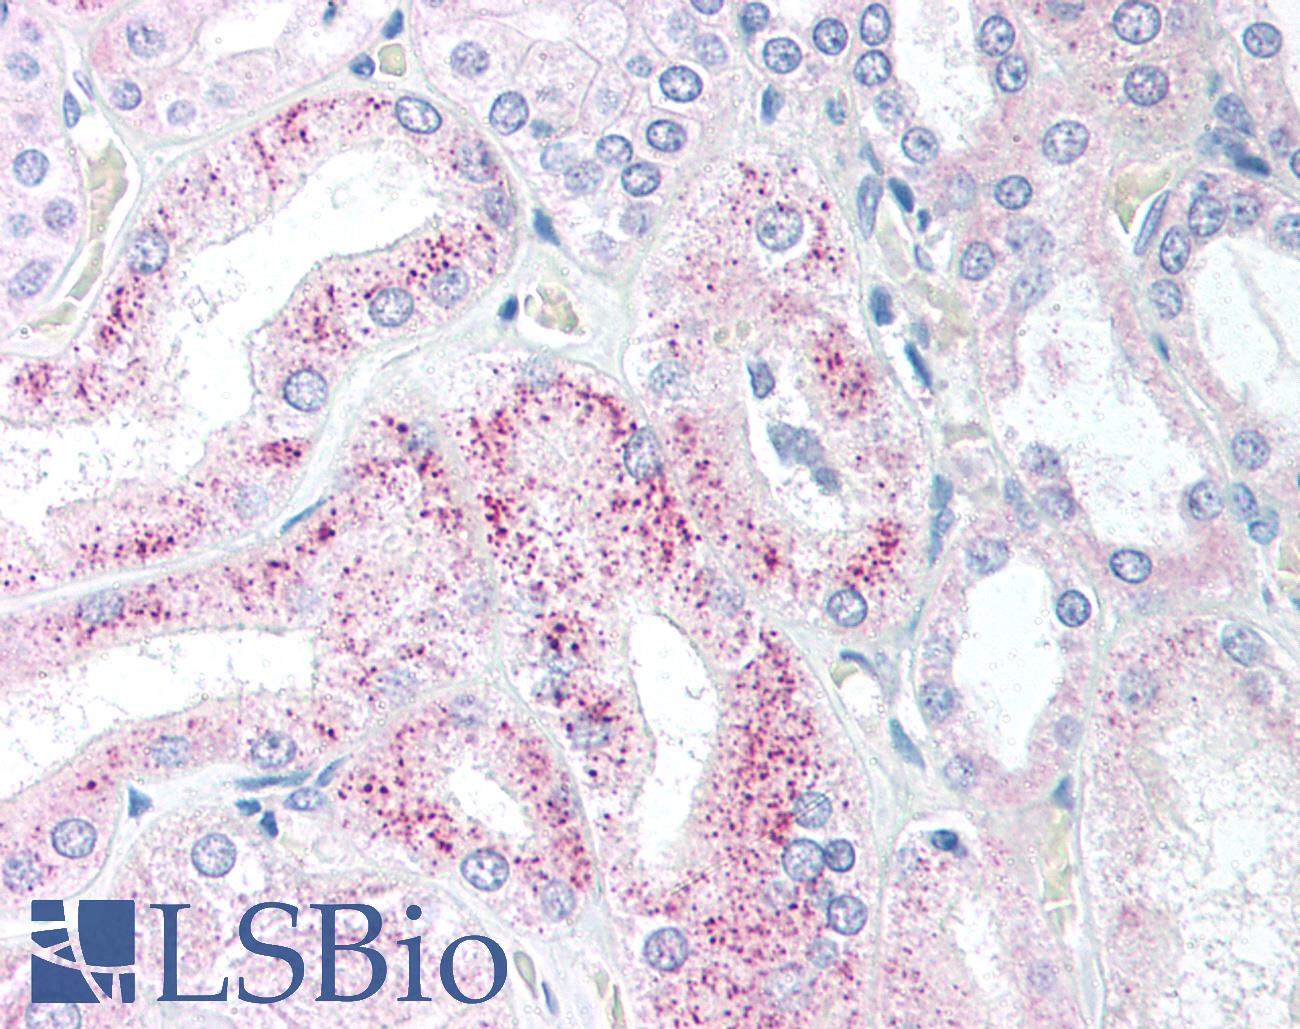 AES / Groucho Antibody - Anti-AES antibody IHC of human kidney. Immunohistochemistry of formalin-fixed, paraffin-embedded tissue after heat-induced antigen retrieval. Antibody concentration 5 ug/ml.